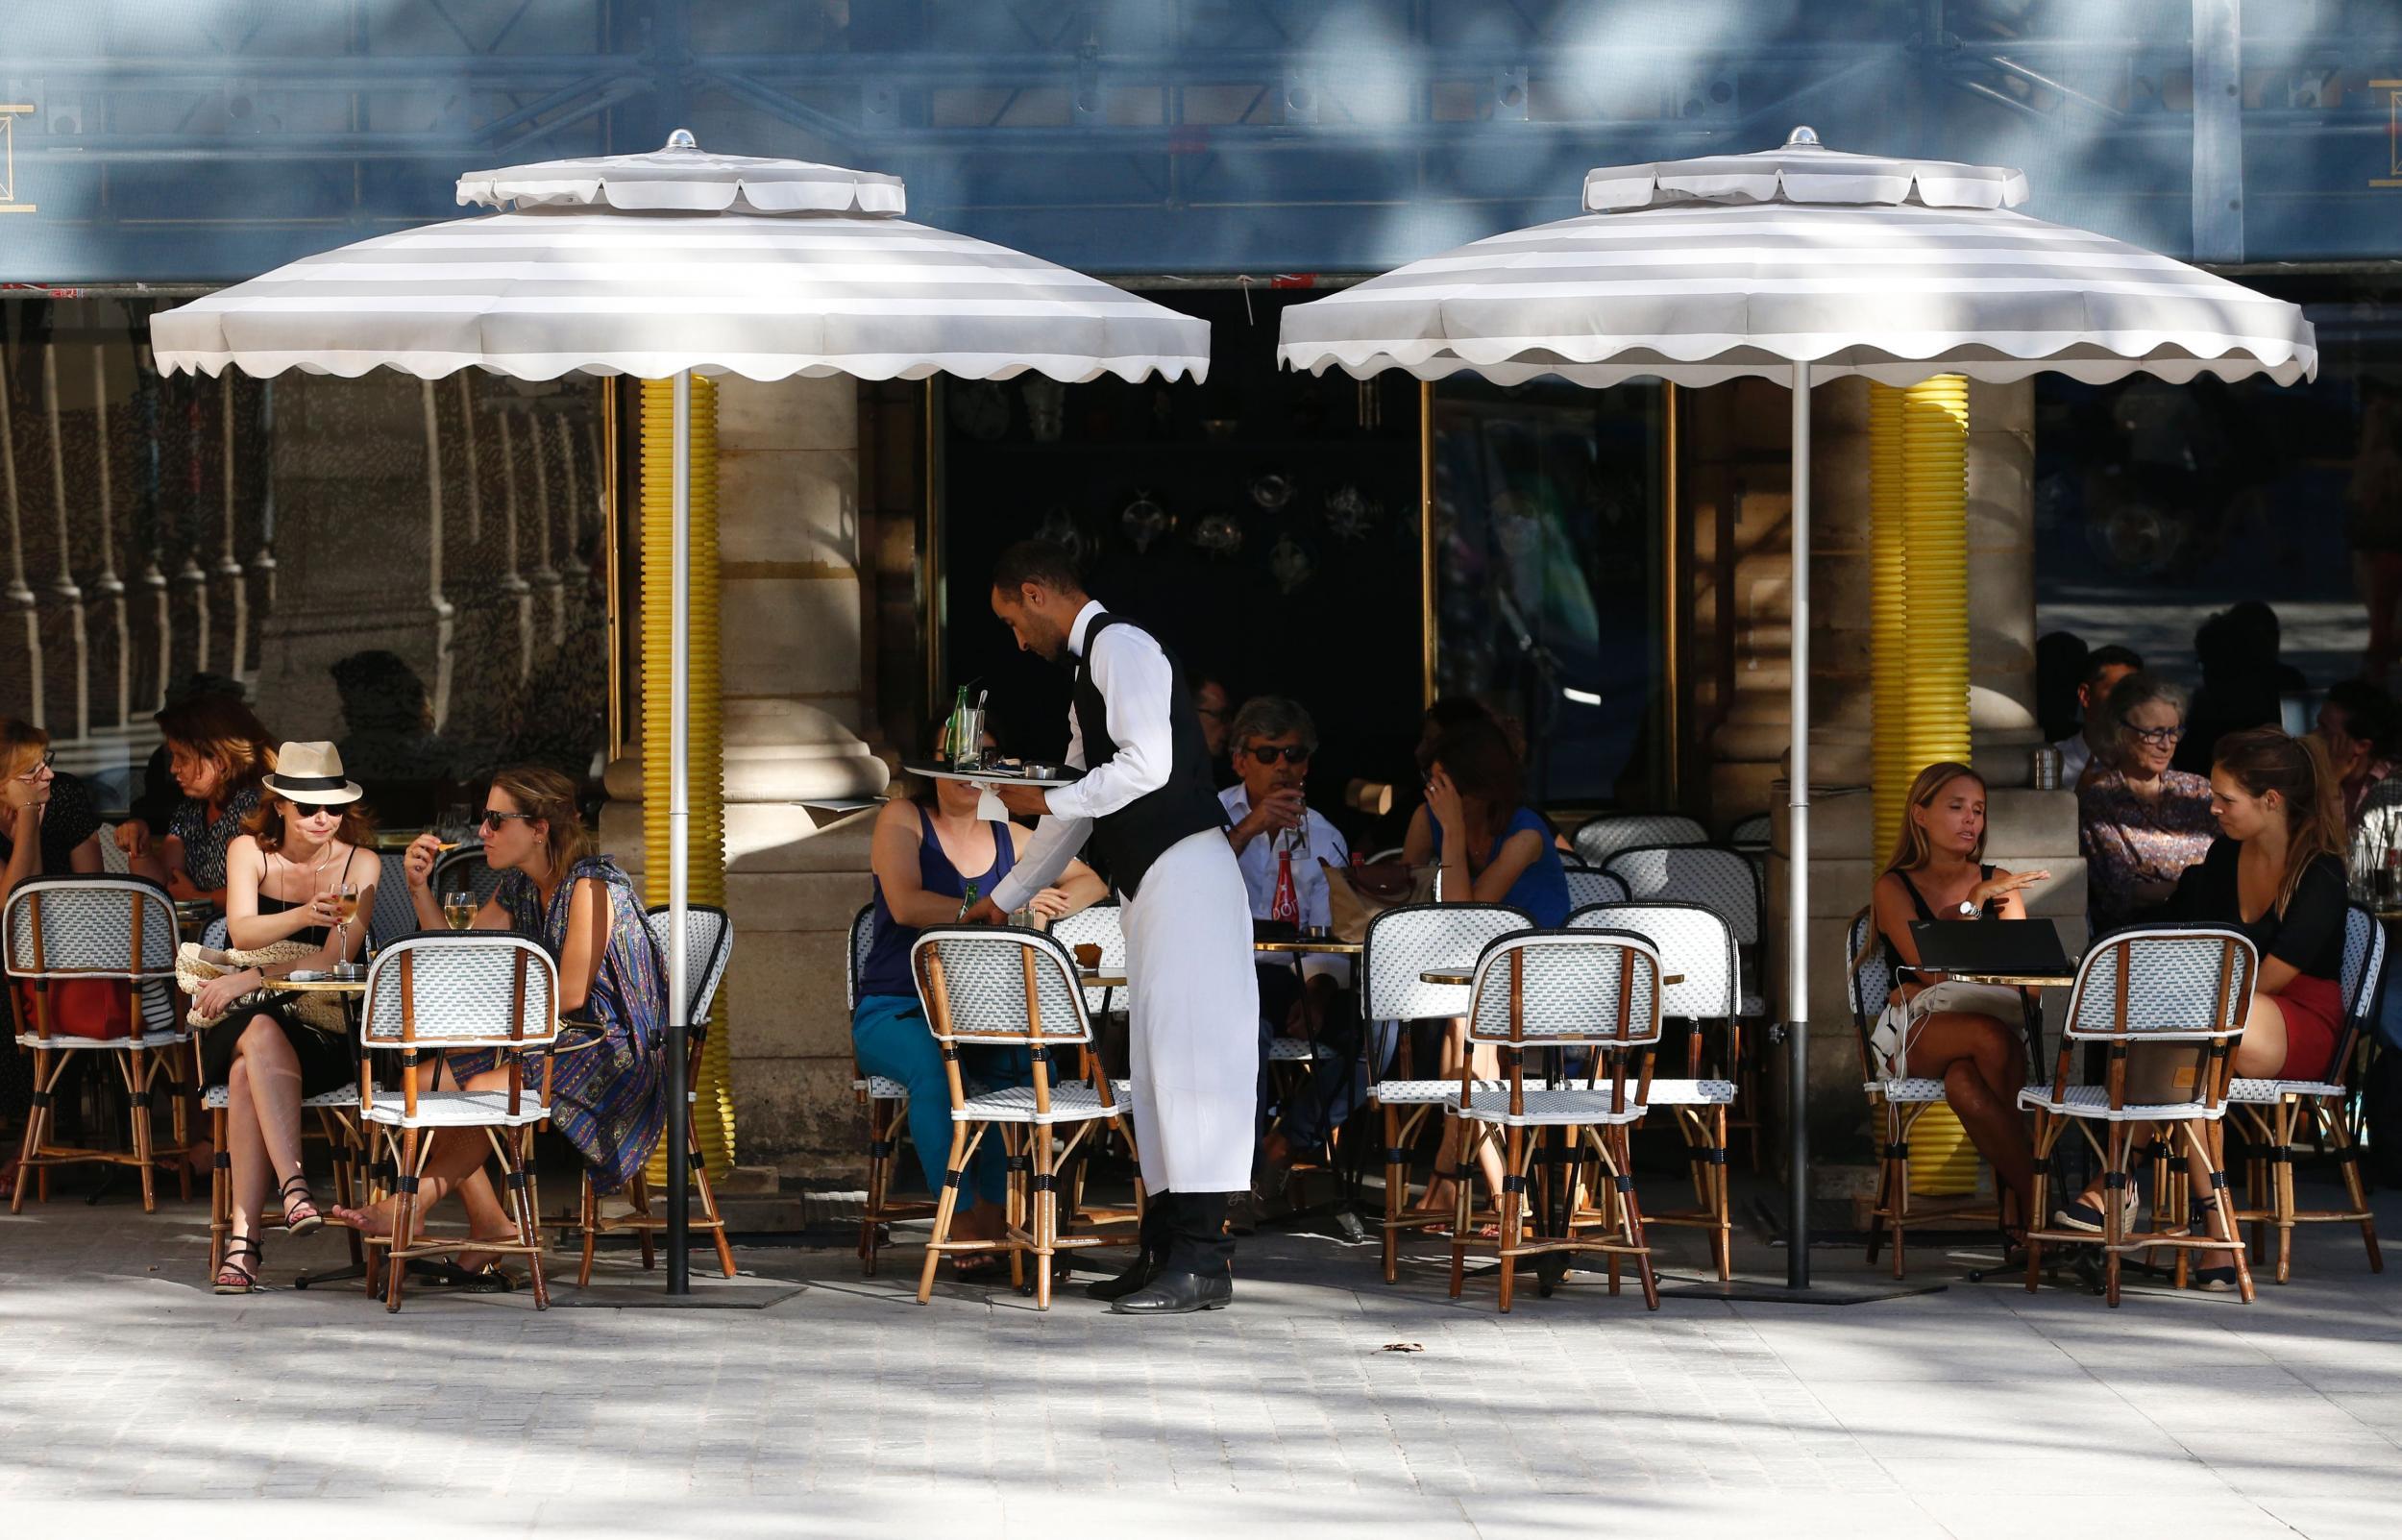 Don't miss out on eating in a Paris café - just choose the right one